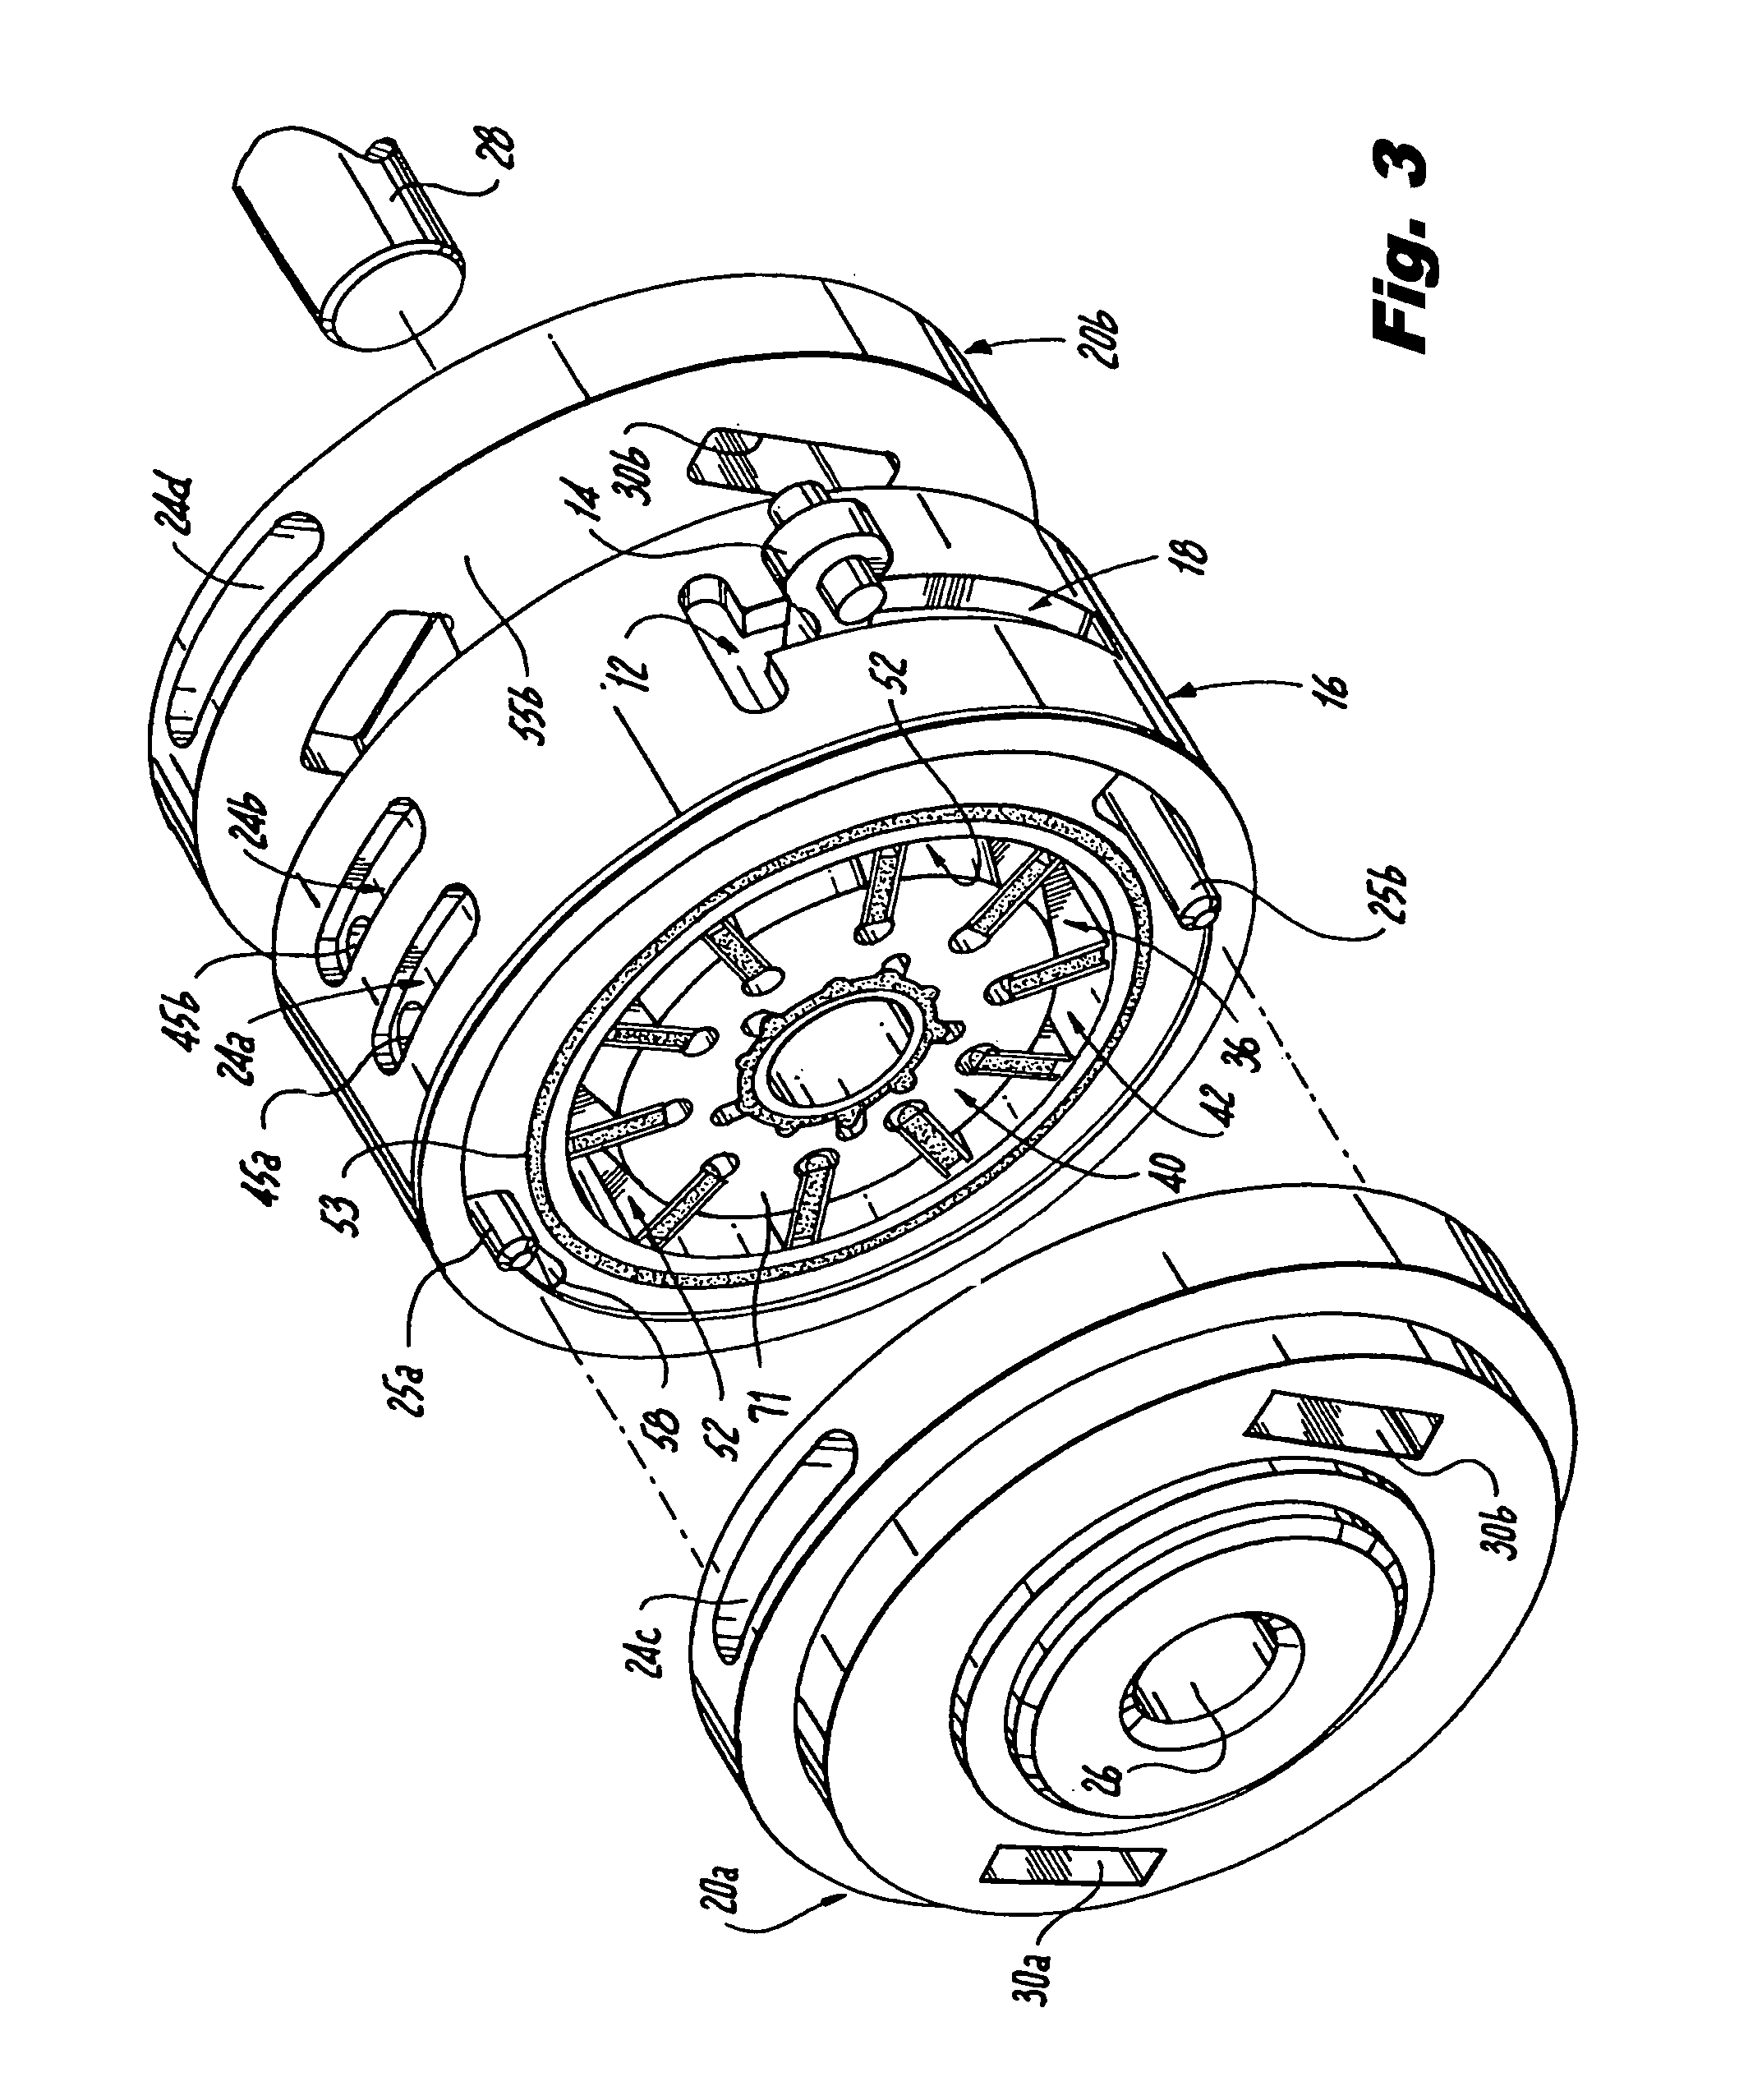 Balanced variable displacement vane pump with floating face seals and biased vane seals